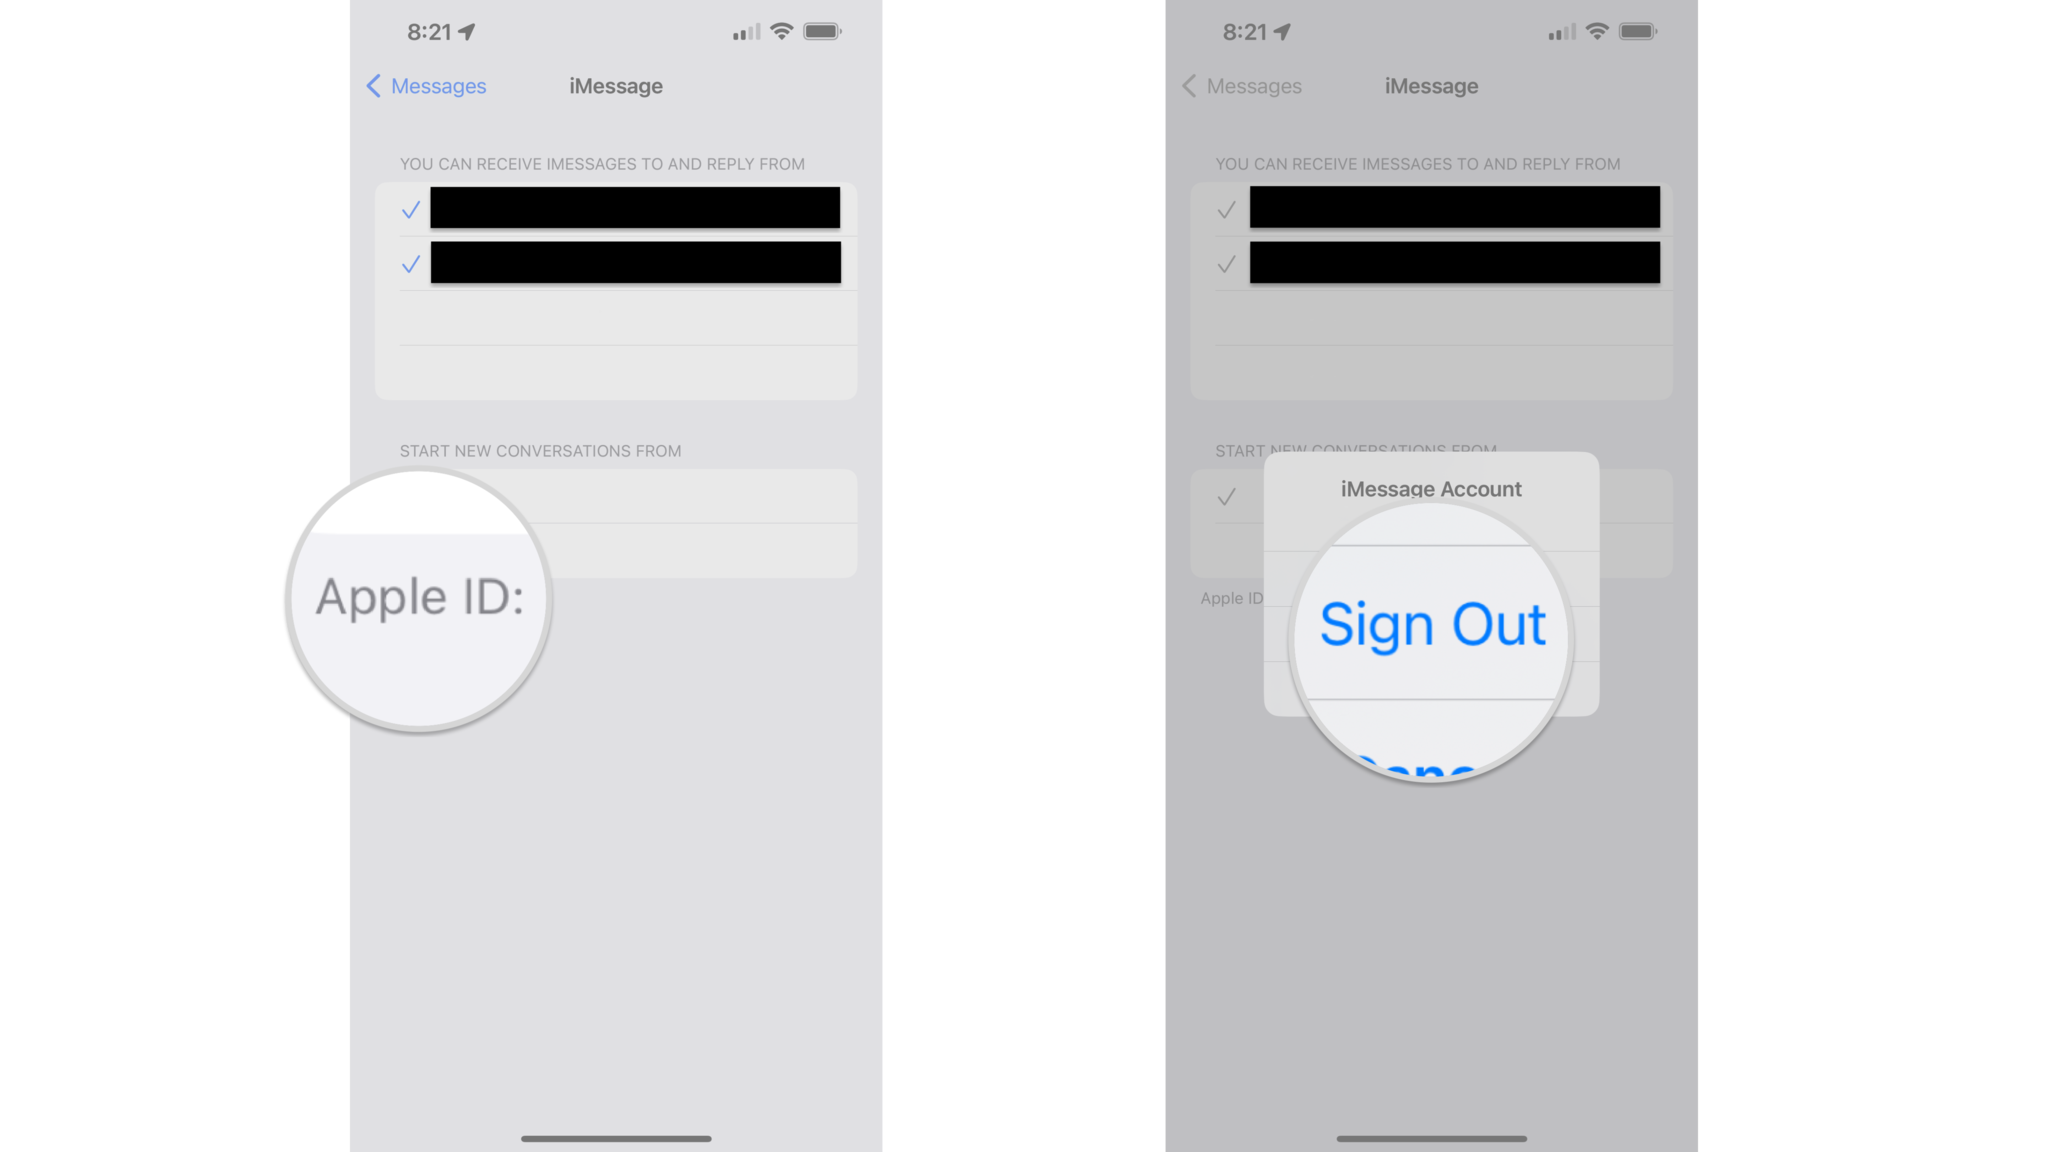 How to sign out of your Apple ID in Messages on the iPhone by showing steps: Tap your Apple ID, Tap Sign Out